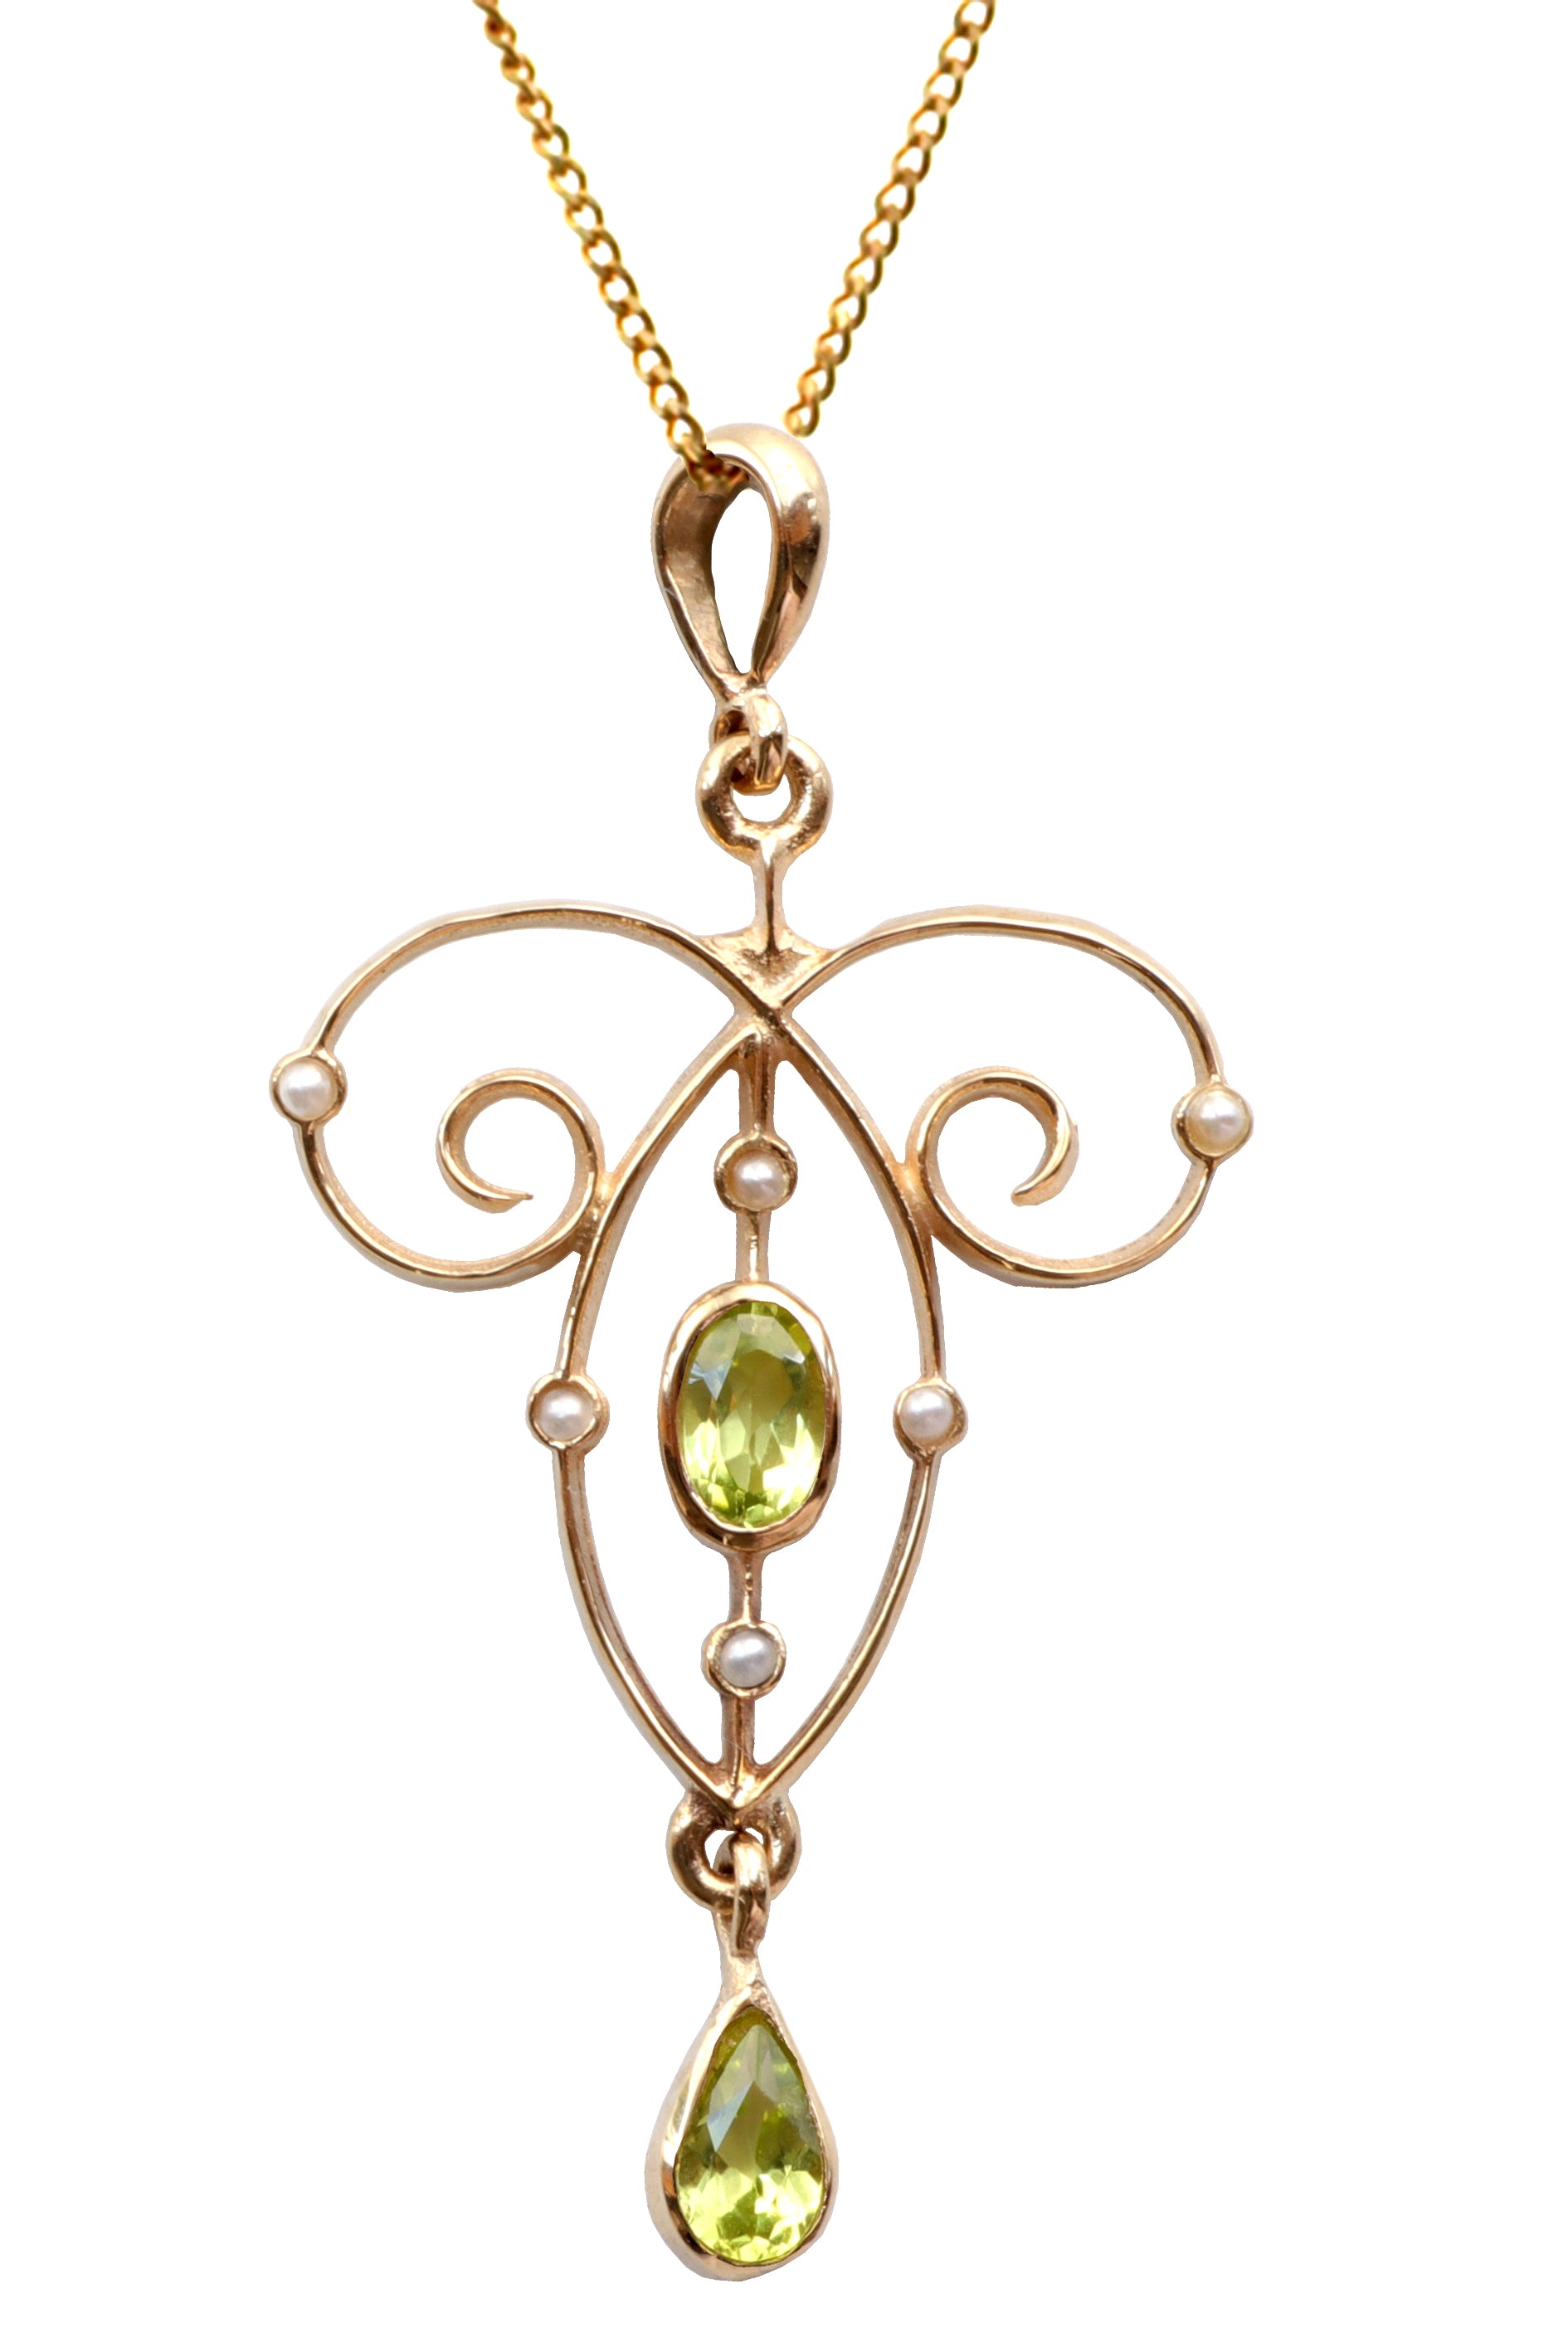 15ct Victorian Peridot & Pearl Necklace | Goodwins Antiques